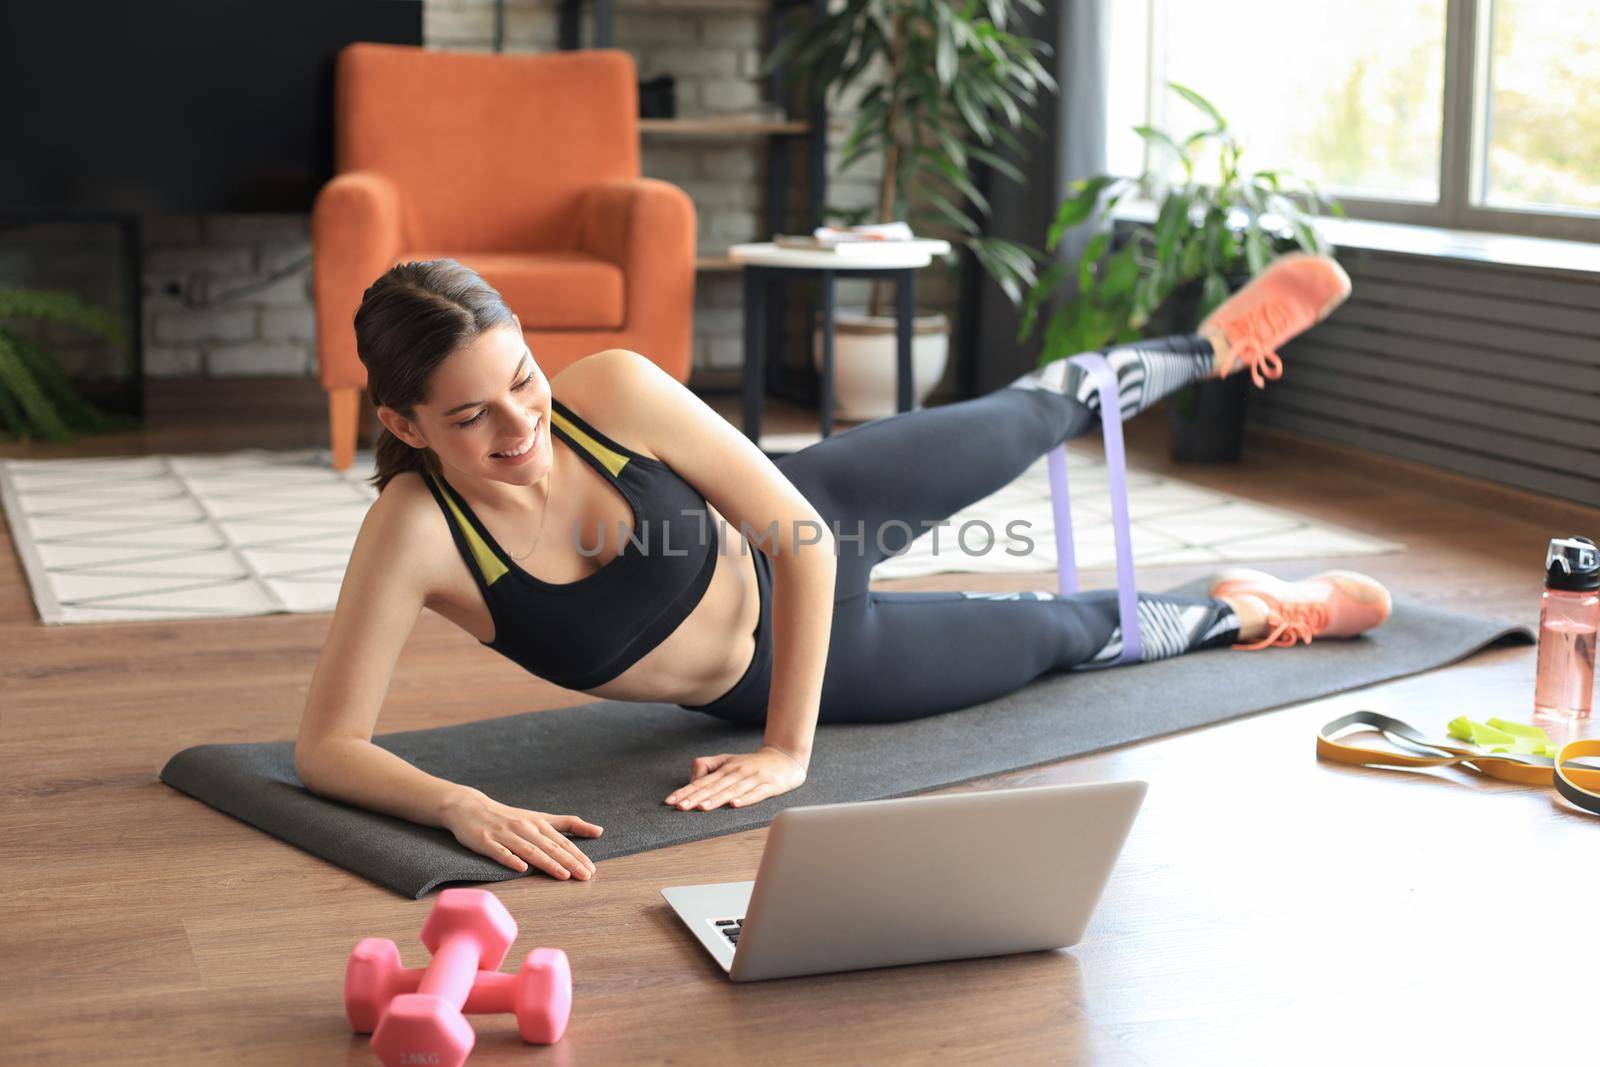 Fitness beautiful slim woman doing side plank with resistance band and watching online tutorials on laptop, training in living room. Stay at home activities. by tsyhun